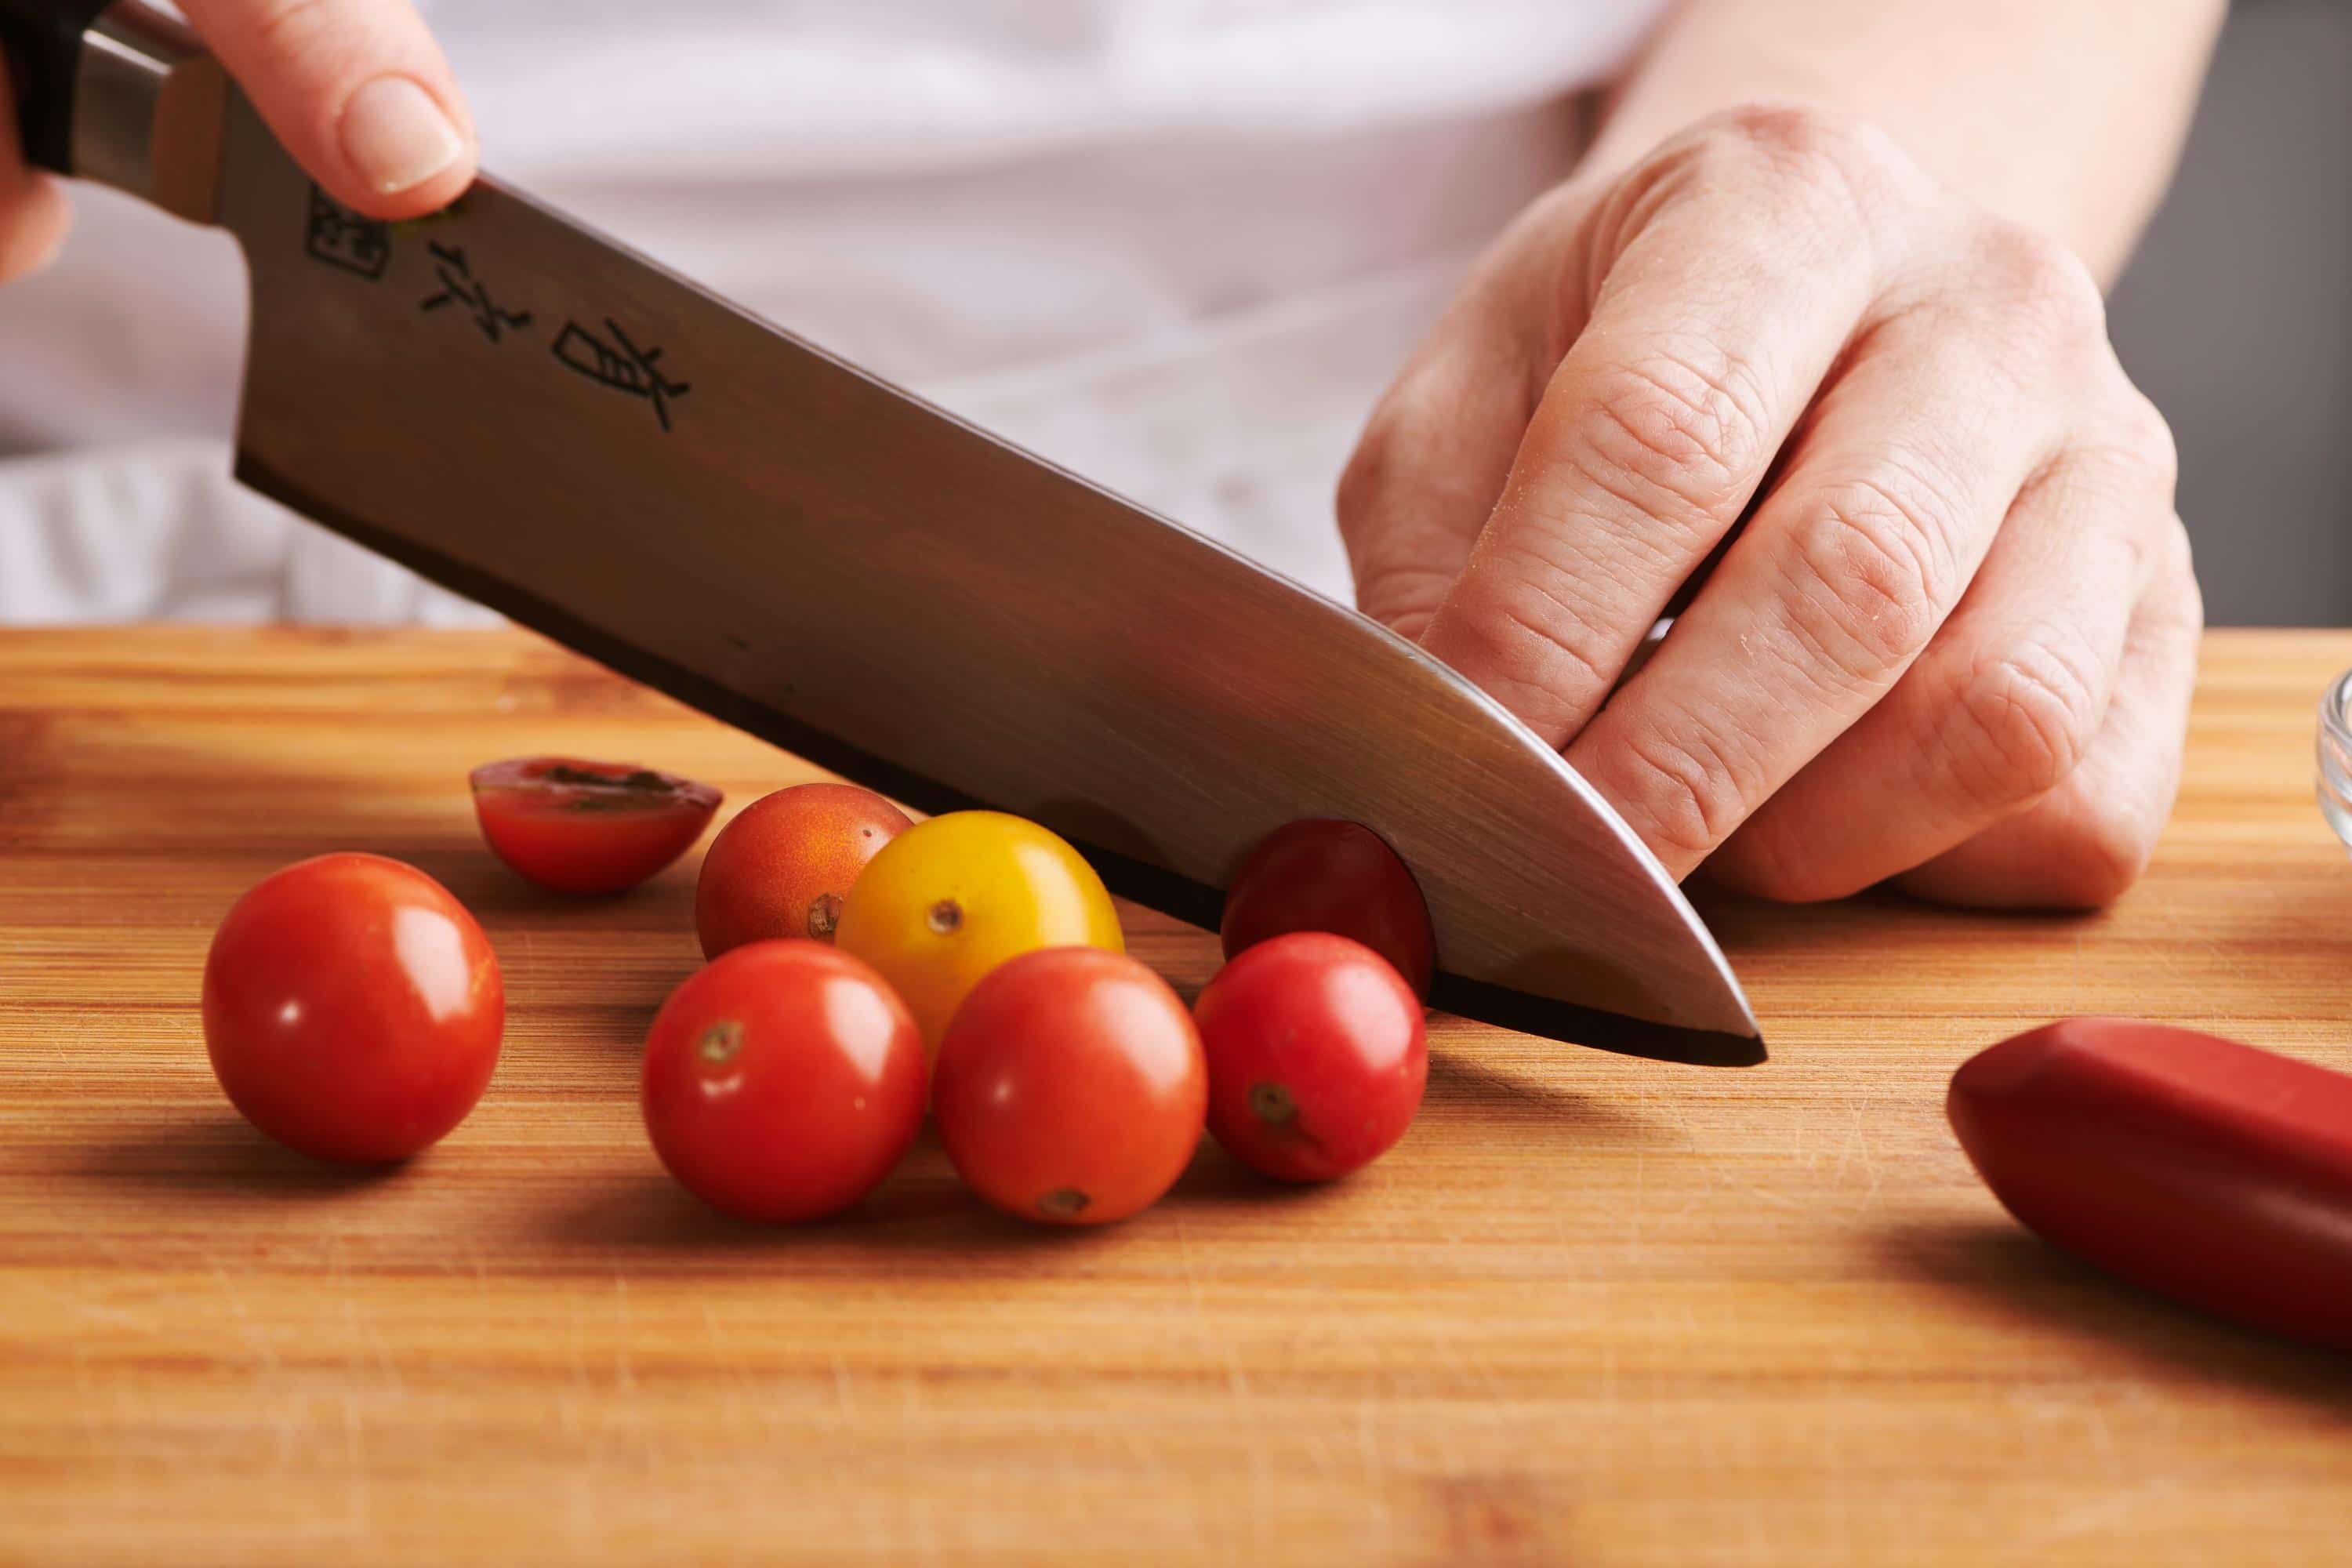 Woman slicing cherry tomatoes with a knife on a wood cutting board.